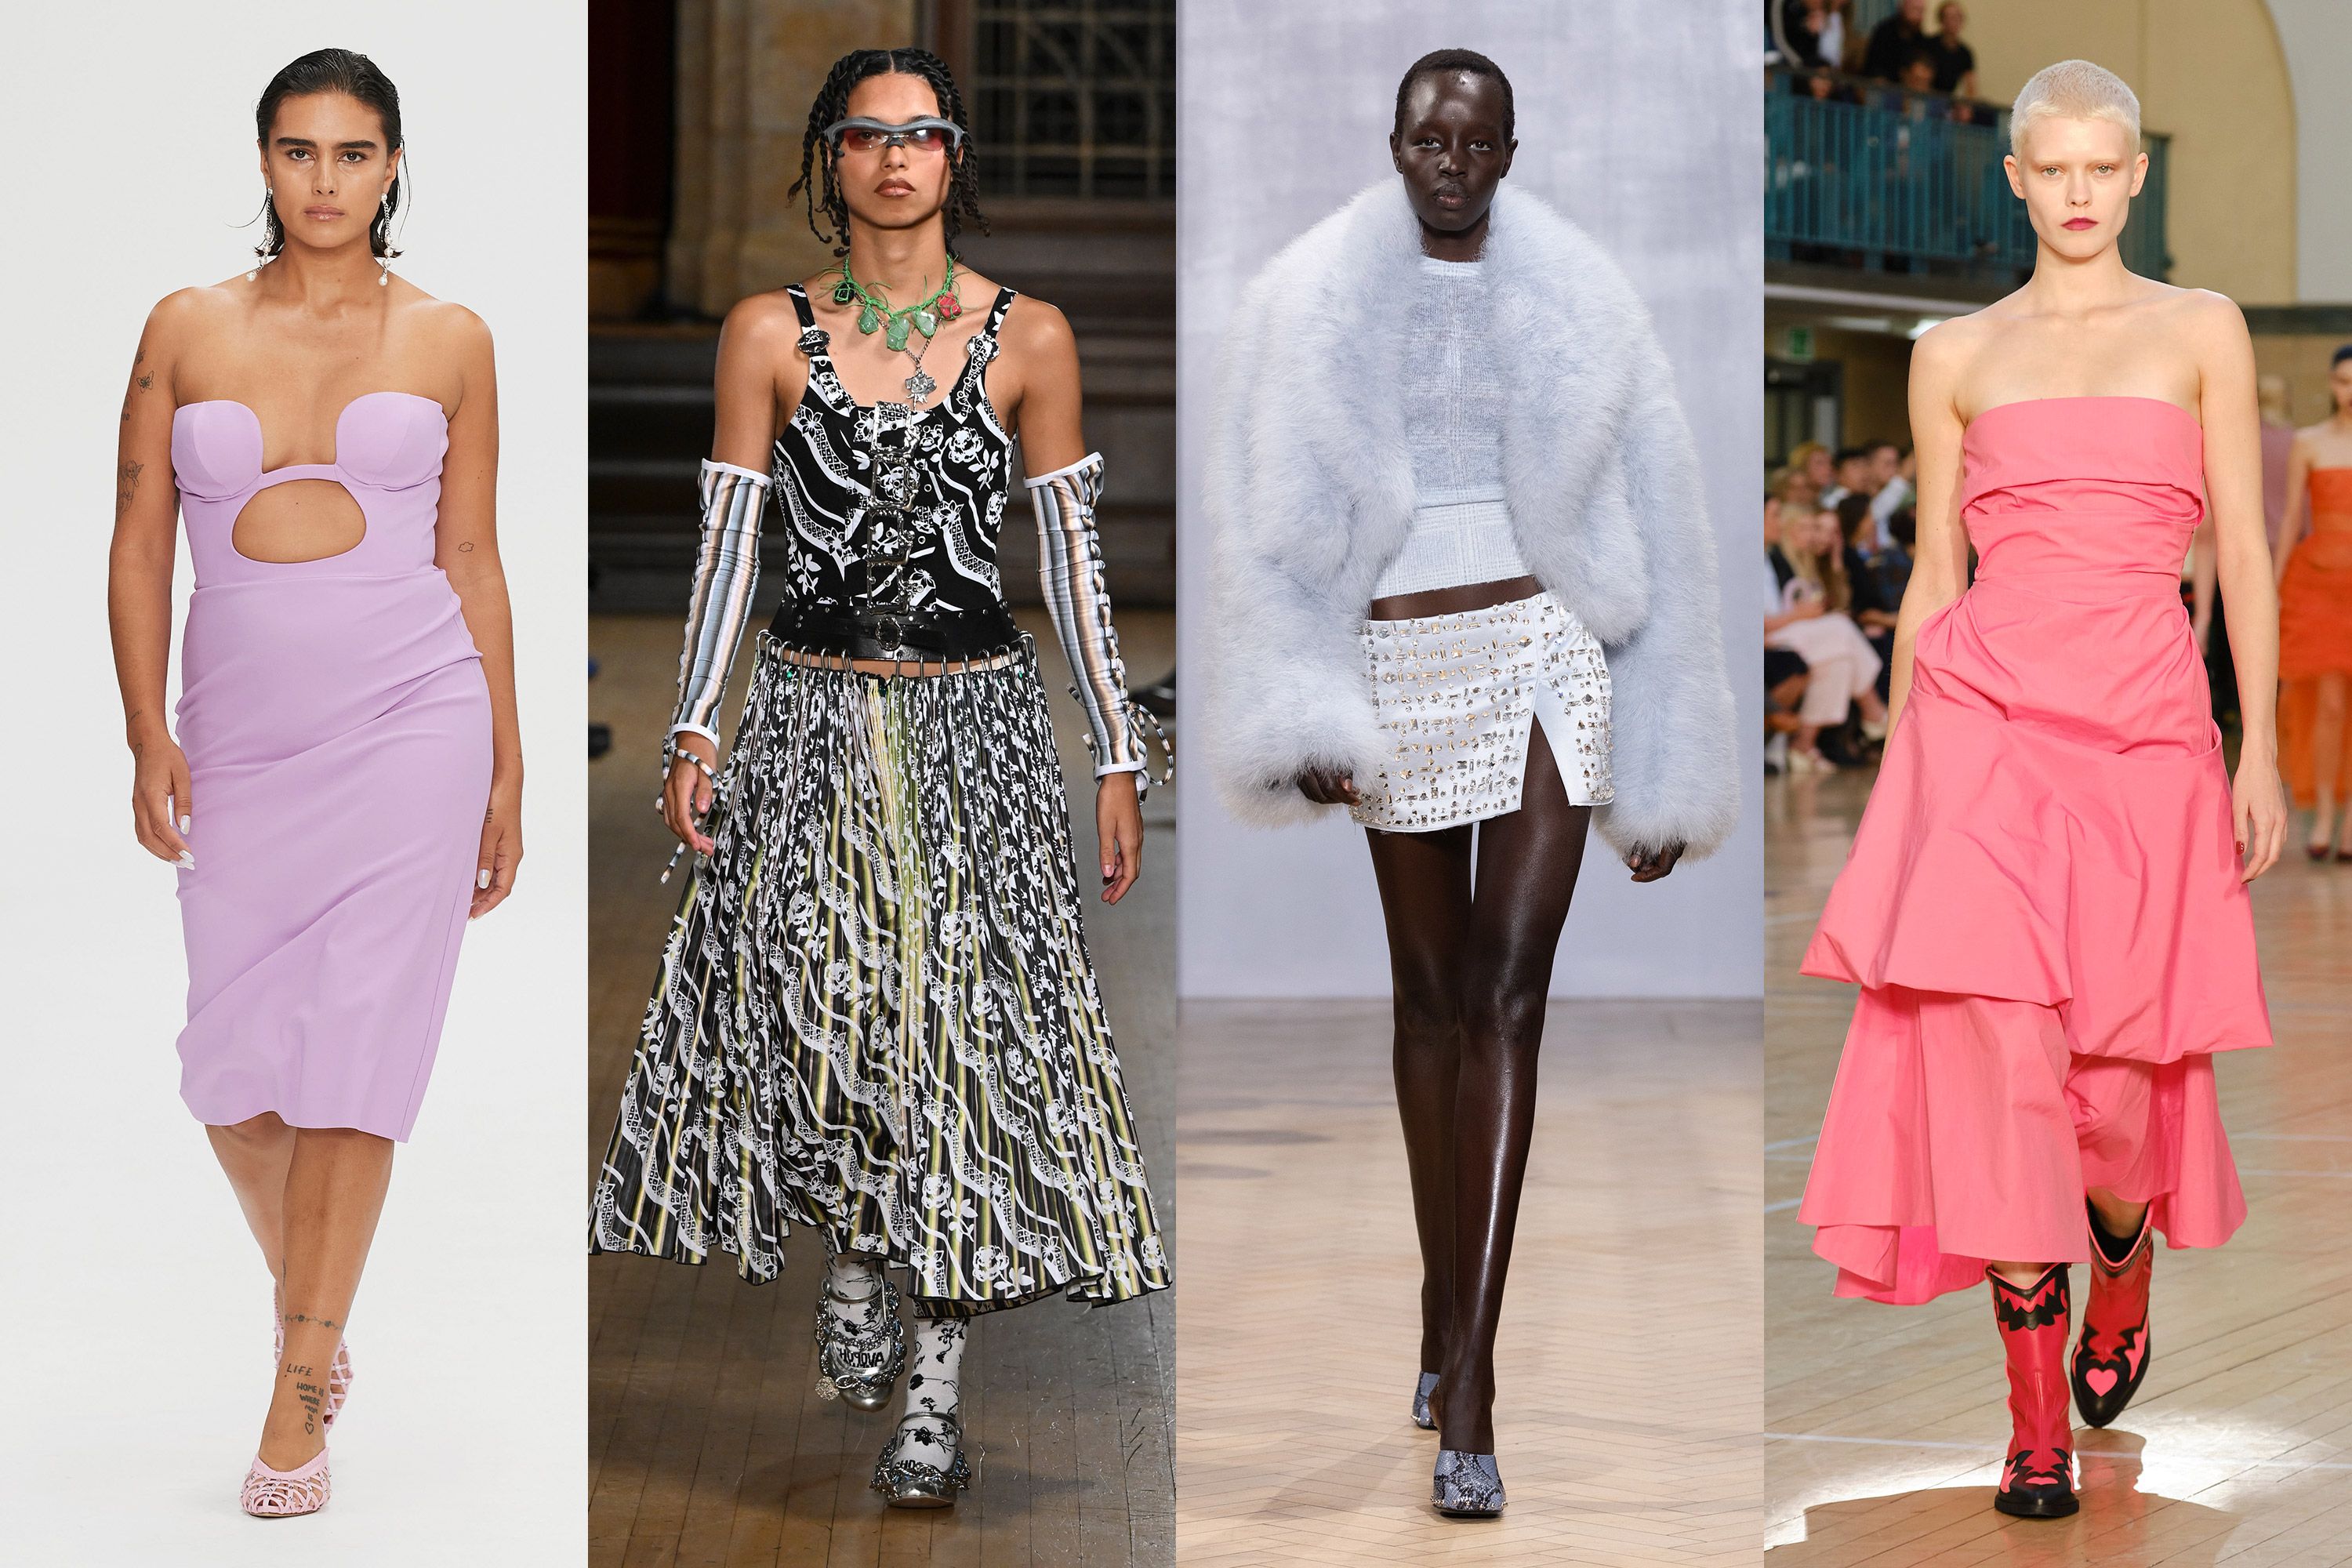 31 Spring 2019 Fashion Trends - Top Spring Runway Trends for Women